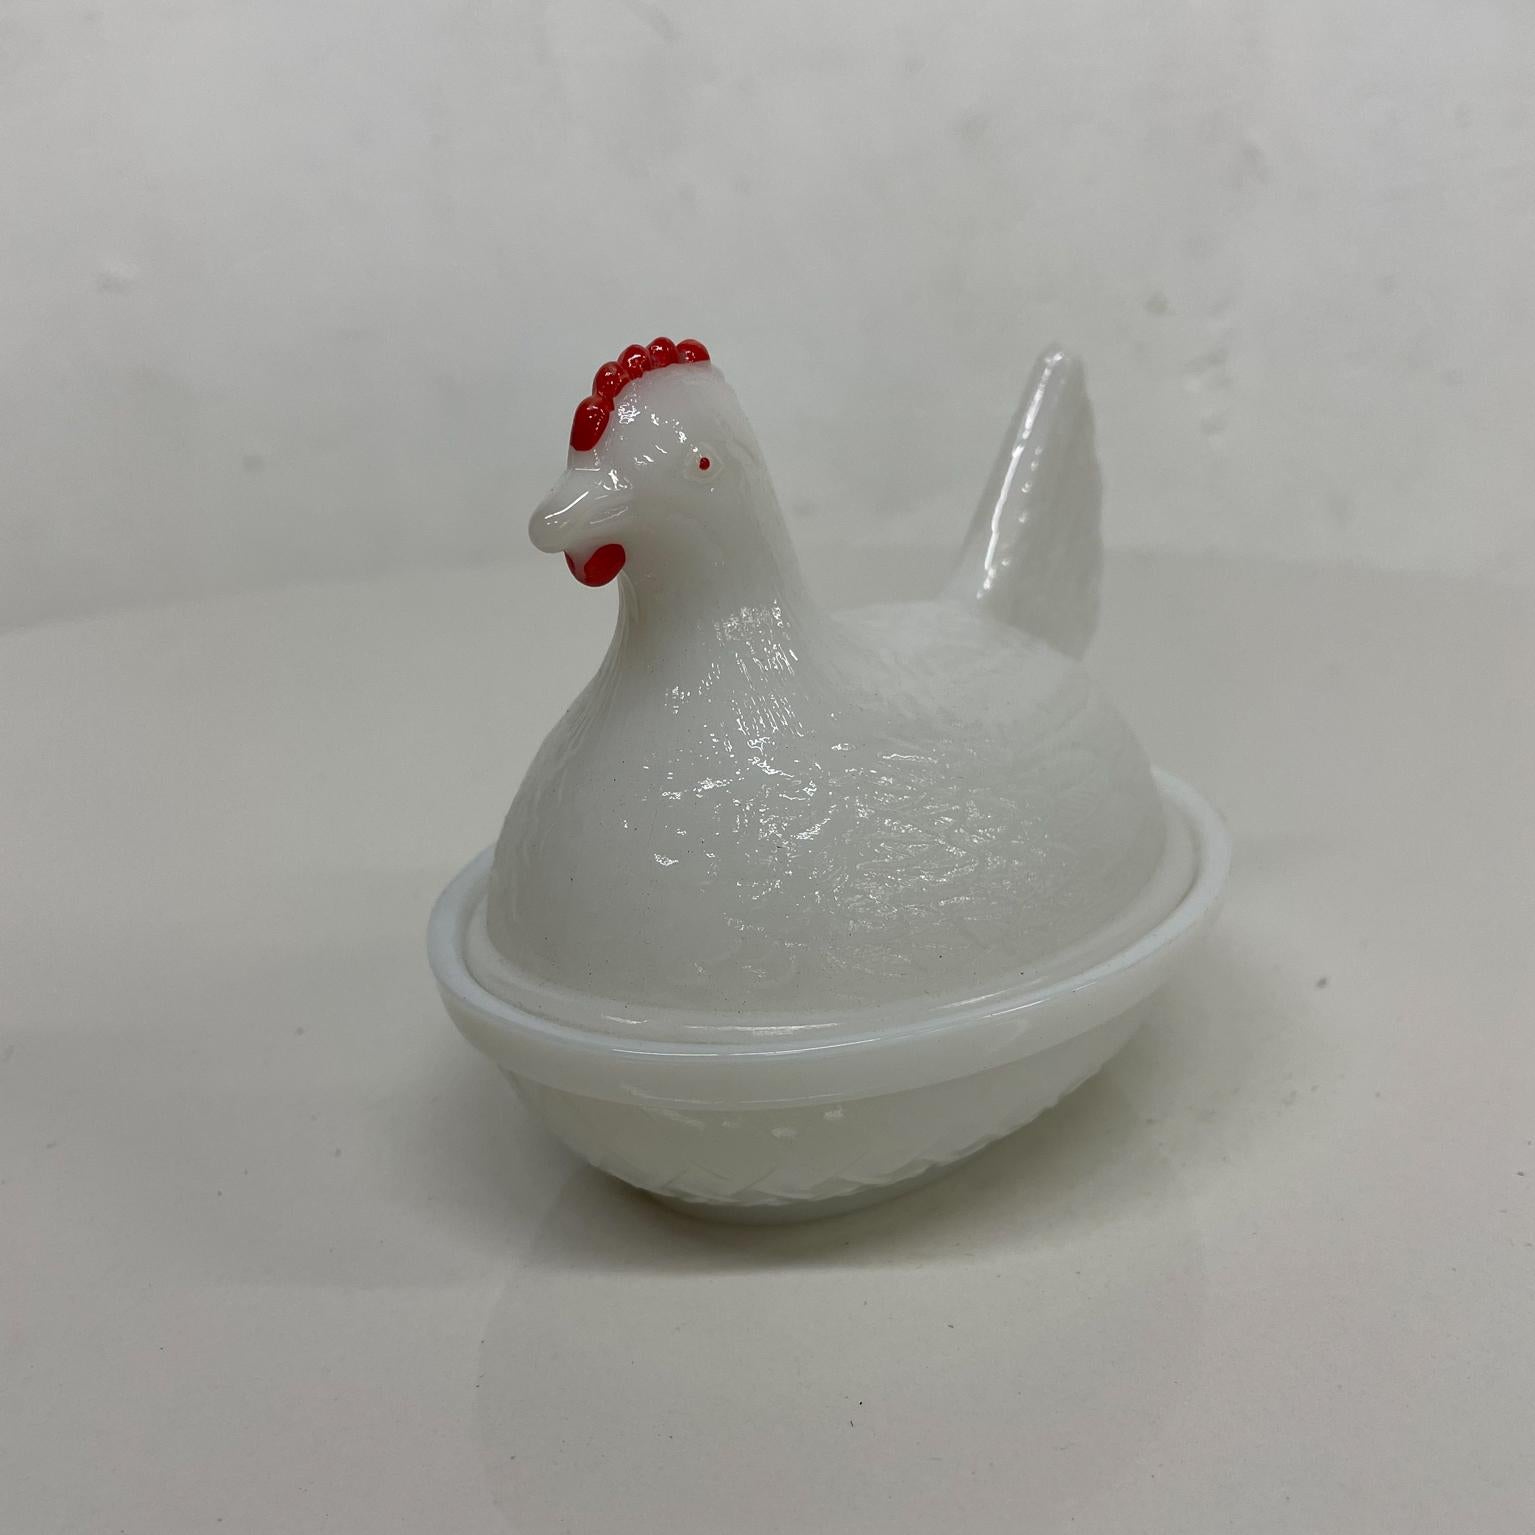 Mini glass HEN dish
Vintage white milk glass mini chicken sitting hen on nest covered dish chicken has red comb
Measures: 4.75 D x 3.88 W x 3.75 H
Preowned unrestored vintage condition
See images please.



